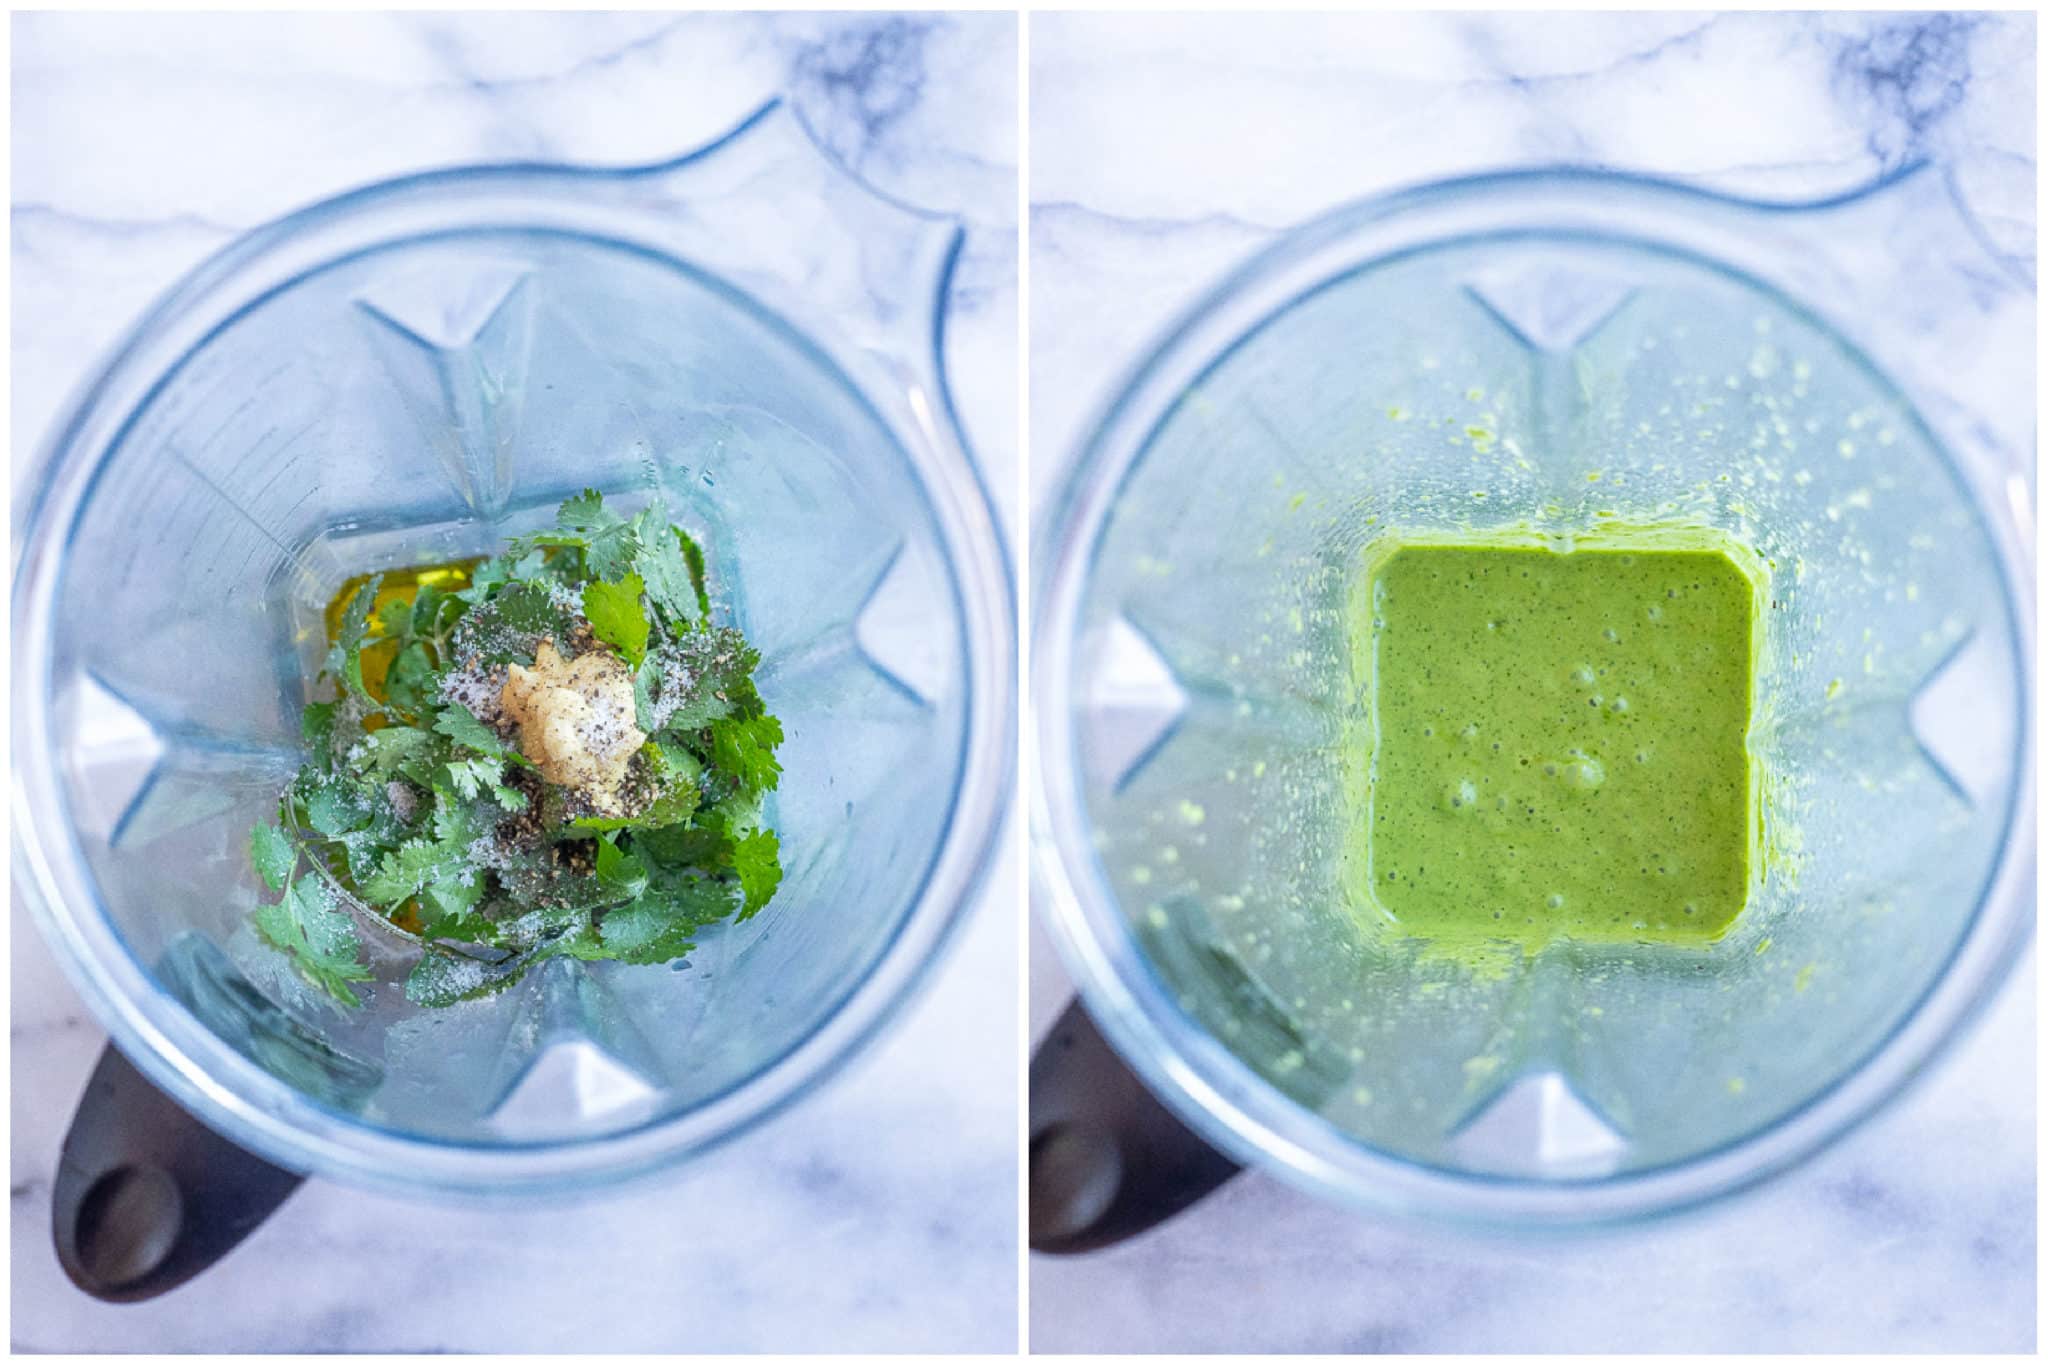 showing how to make the cilantro lime salad dressing in a blender